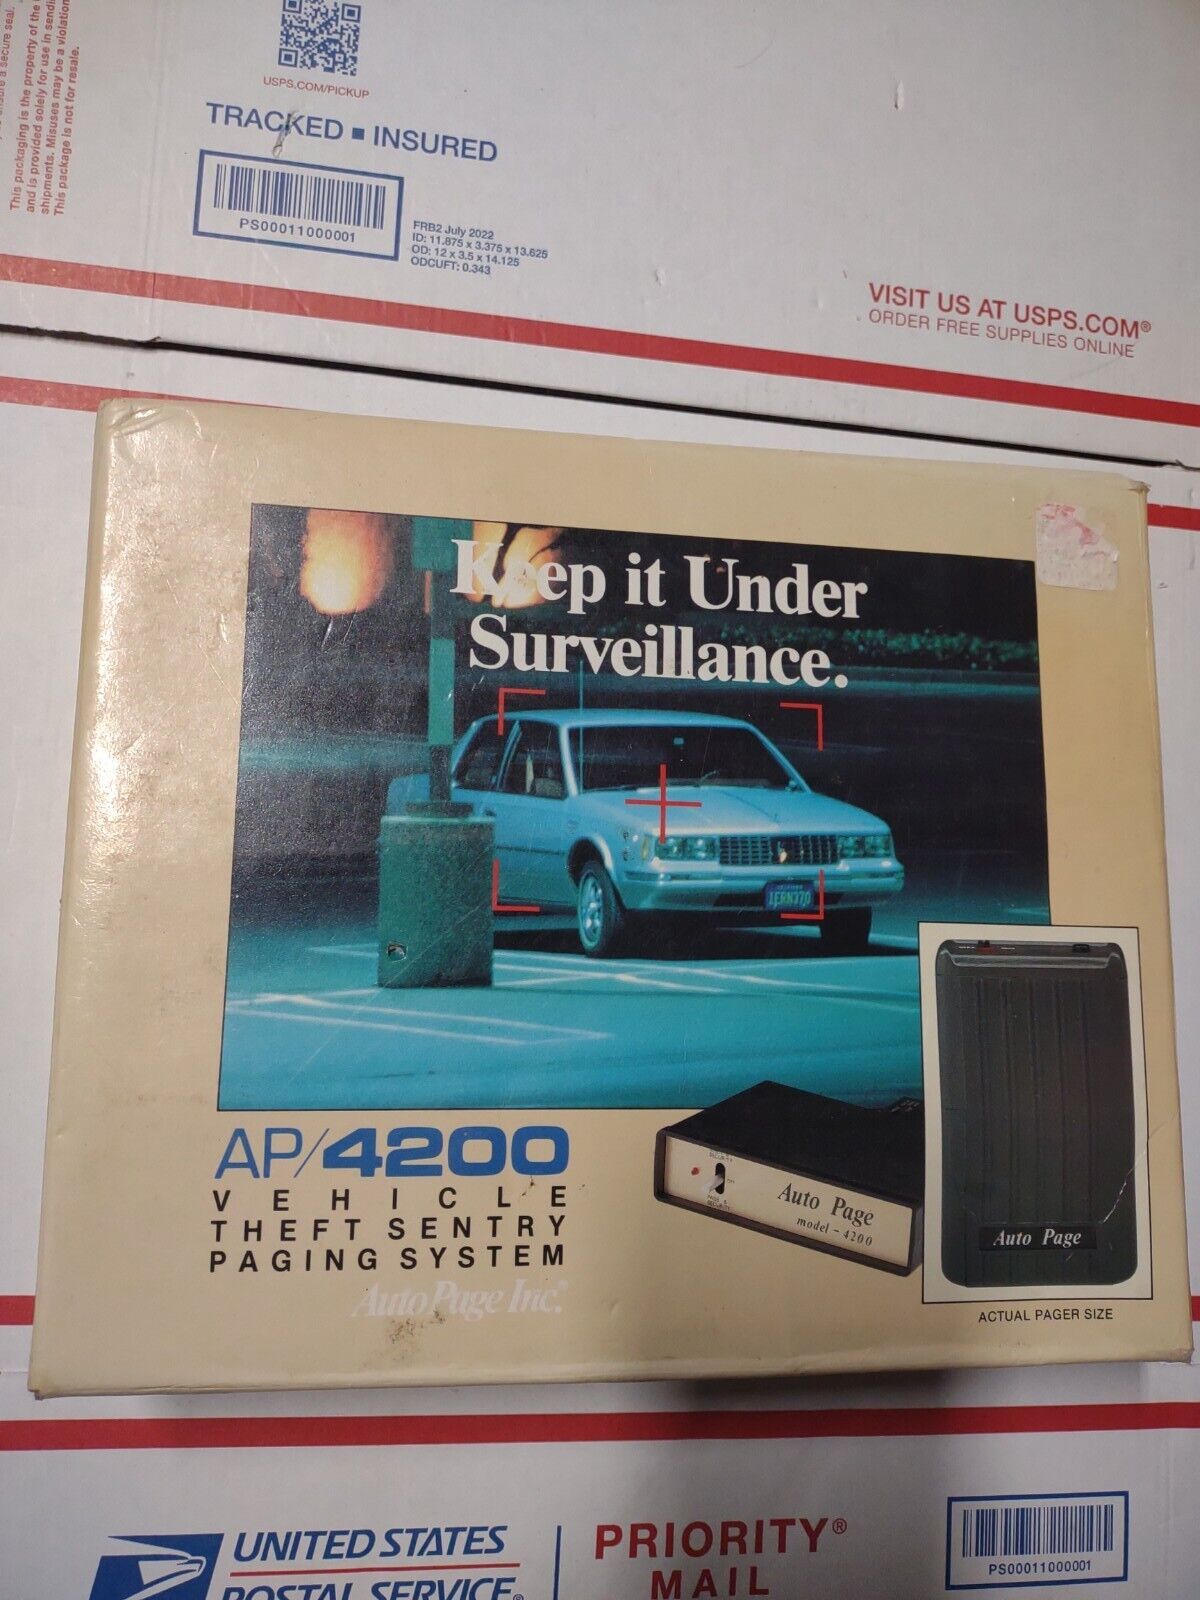 AutoPage Inc. AP/4200 Vehicle Theft Sentry Paging System Antique Collectable